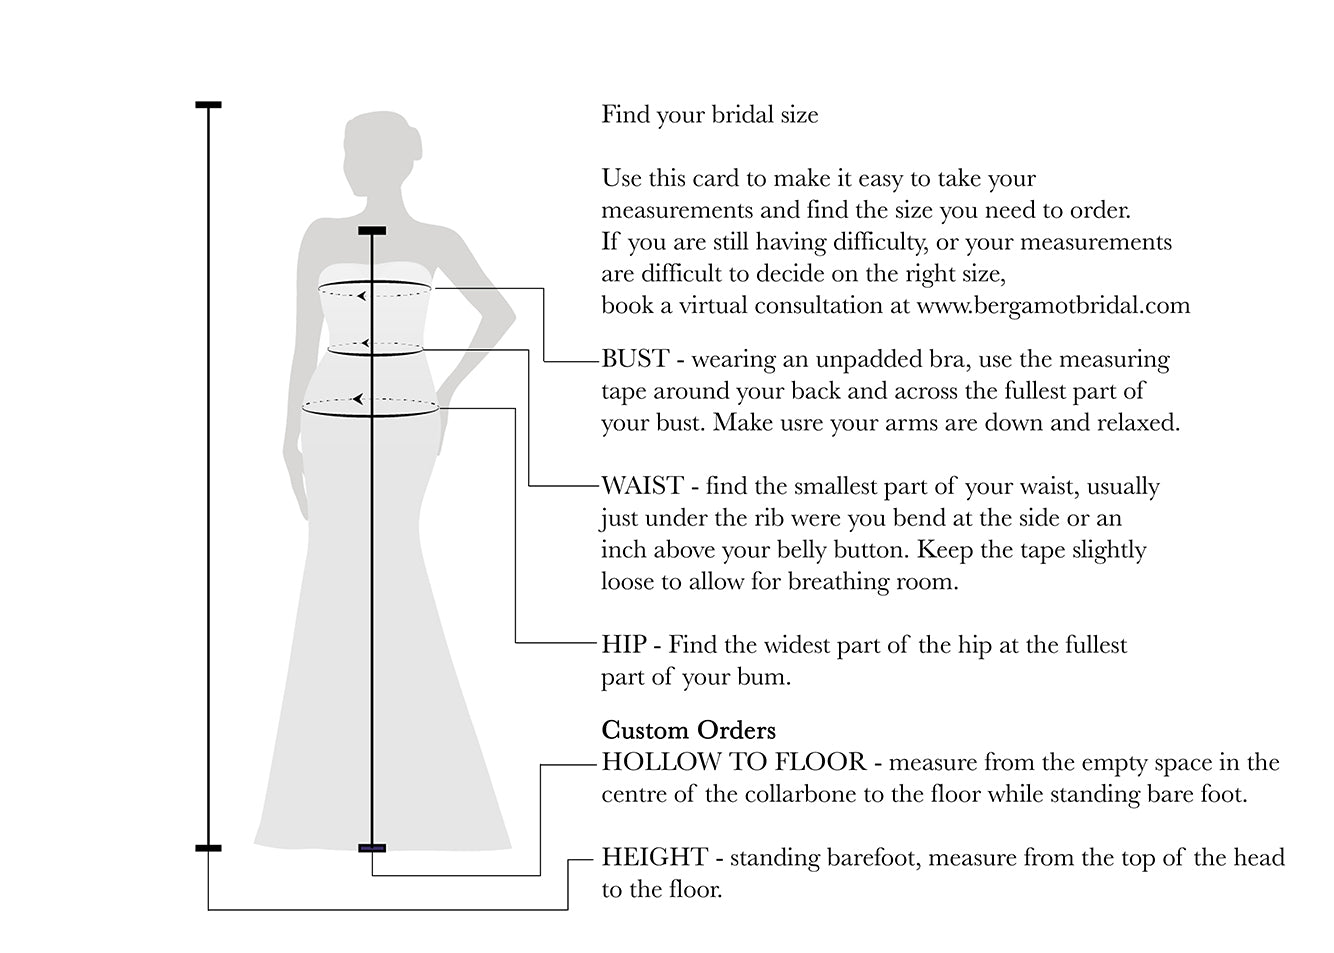 Illustration showing how to measure body parts for Bergamot Bridal's Plunging Sweetheart Neckline Beaded Crepe Fit And Flare Wedding Dress, with descriptions for bust, waist, and hip measurements.